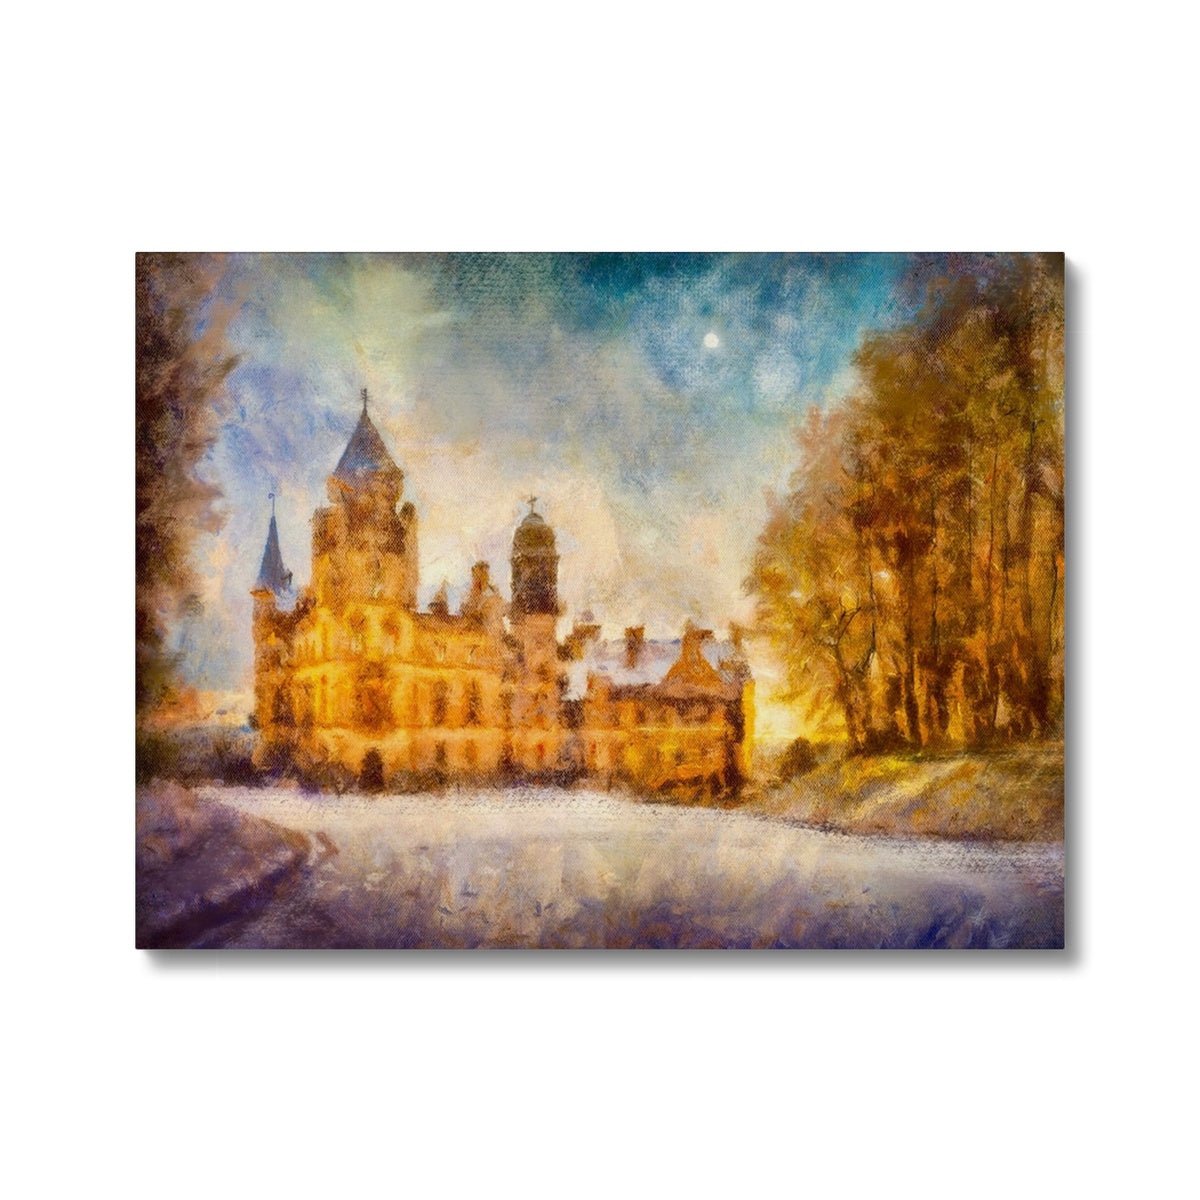 Dunrobin Castle Moonlight Painting | Canvas From Scotland-Contemporary Stretched Canvas Prints-Scottish Castles Art Gallery-24"x18"-Paintings, Prints, Homeware, Art Gifts From Scotland By Scottish Artist Kevin Hunter